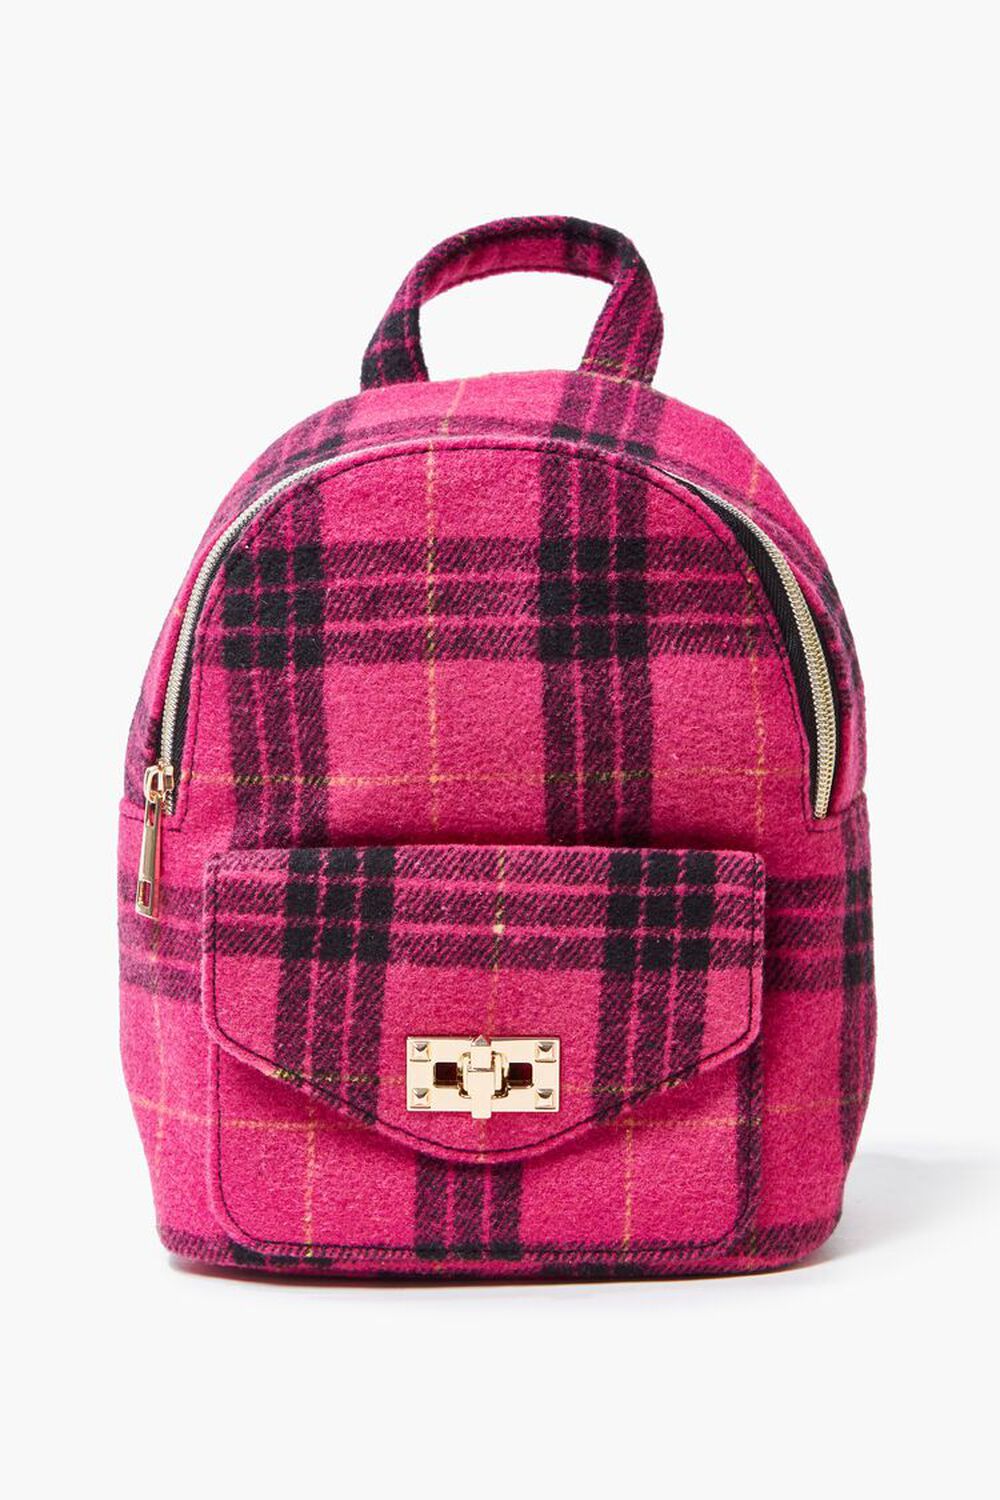 NEW UNDER 1 SKY PINK PLAID DAISY FLOWERS SAFFIANO PVC CONVERTABLE BACK PACK  BAG